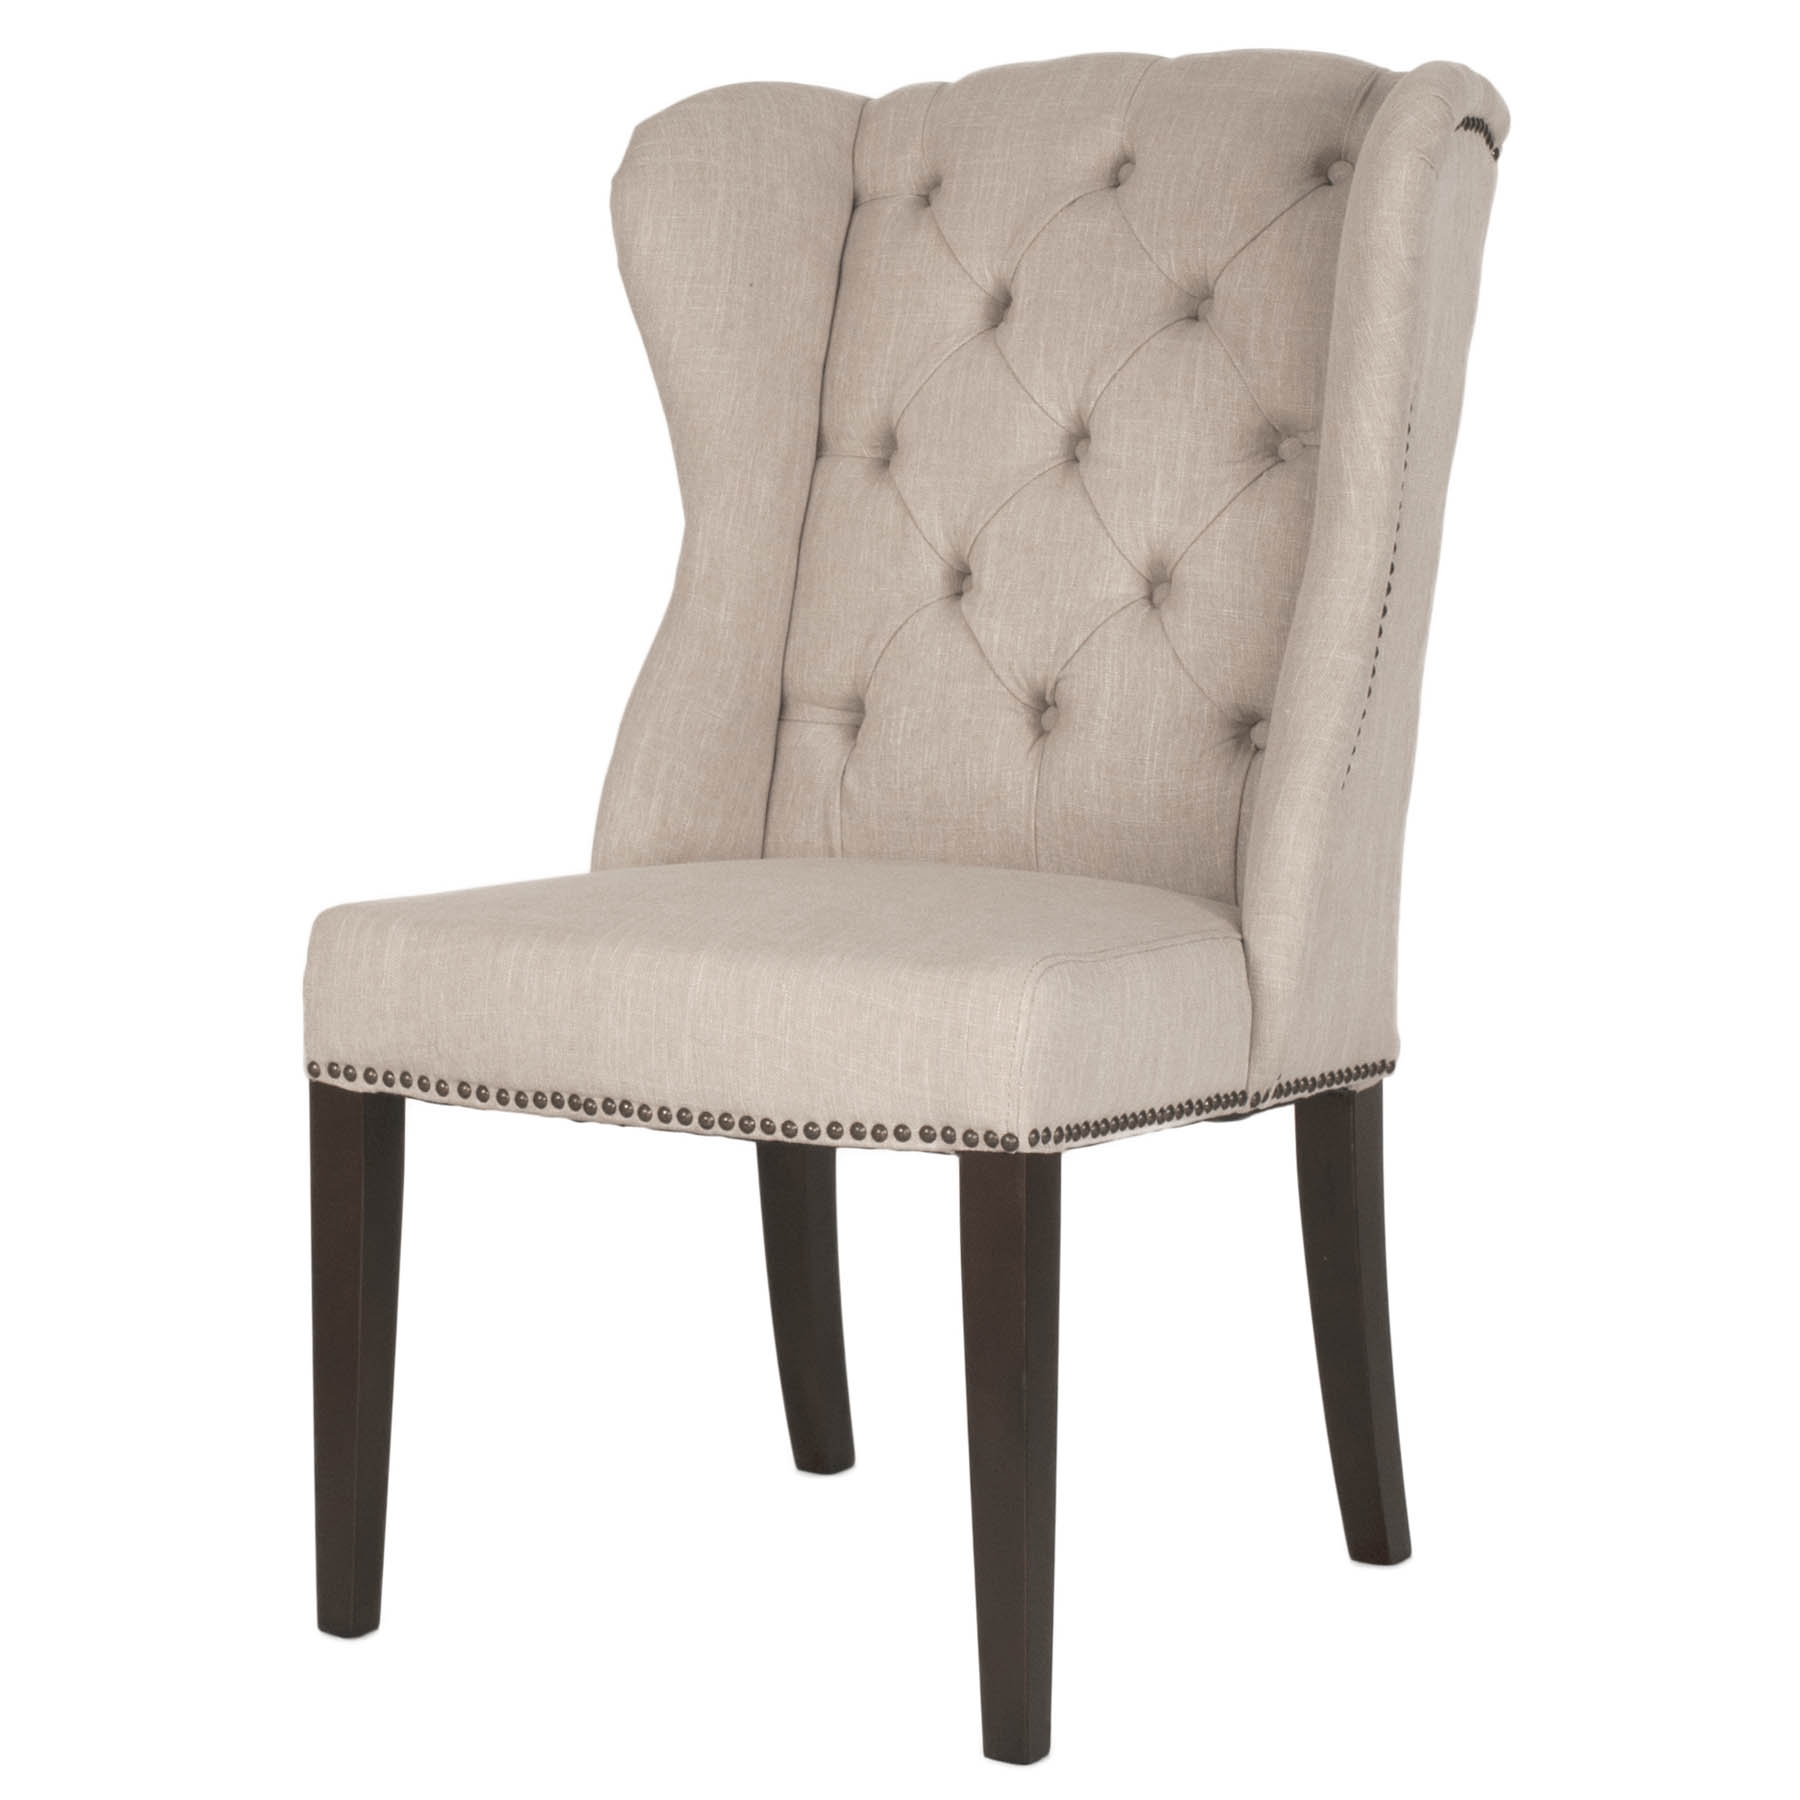 Maison Dining Chair - Image 1